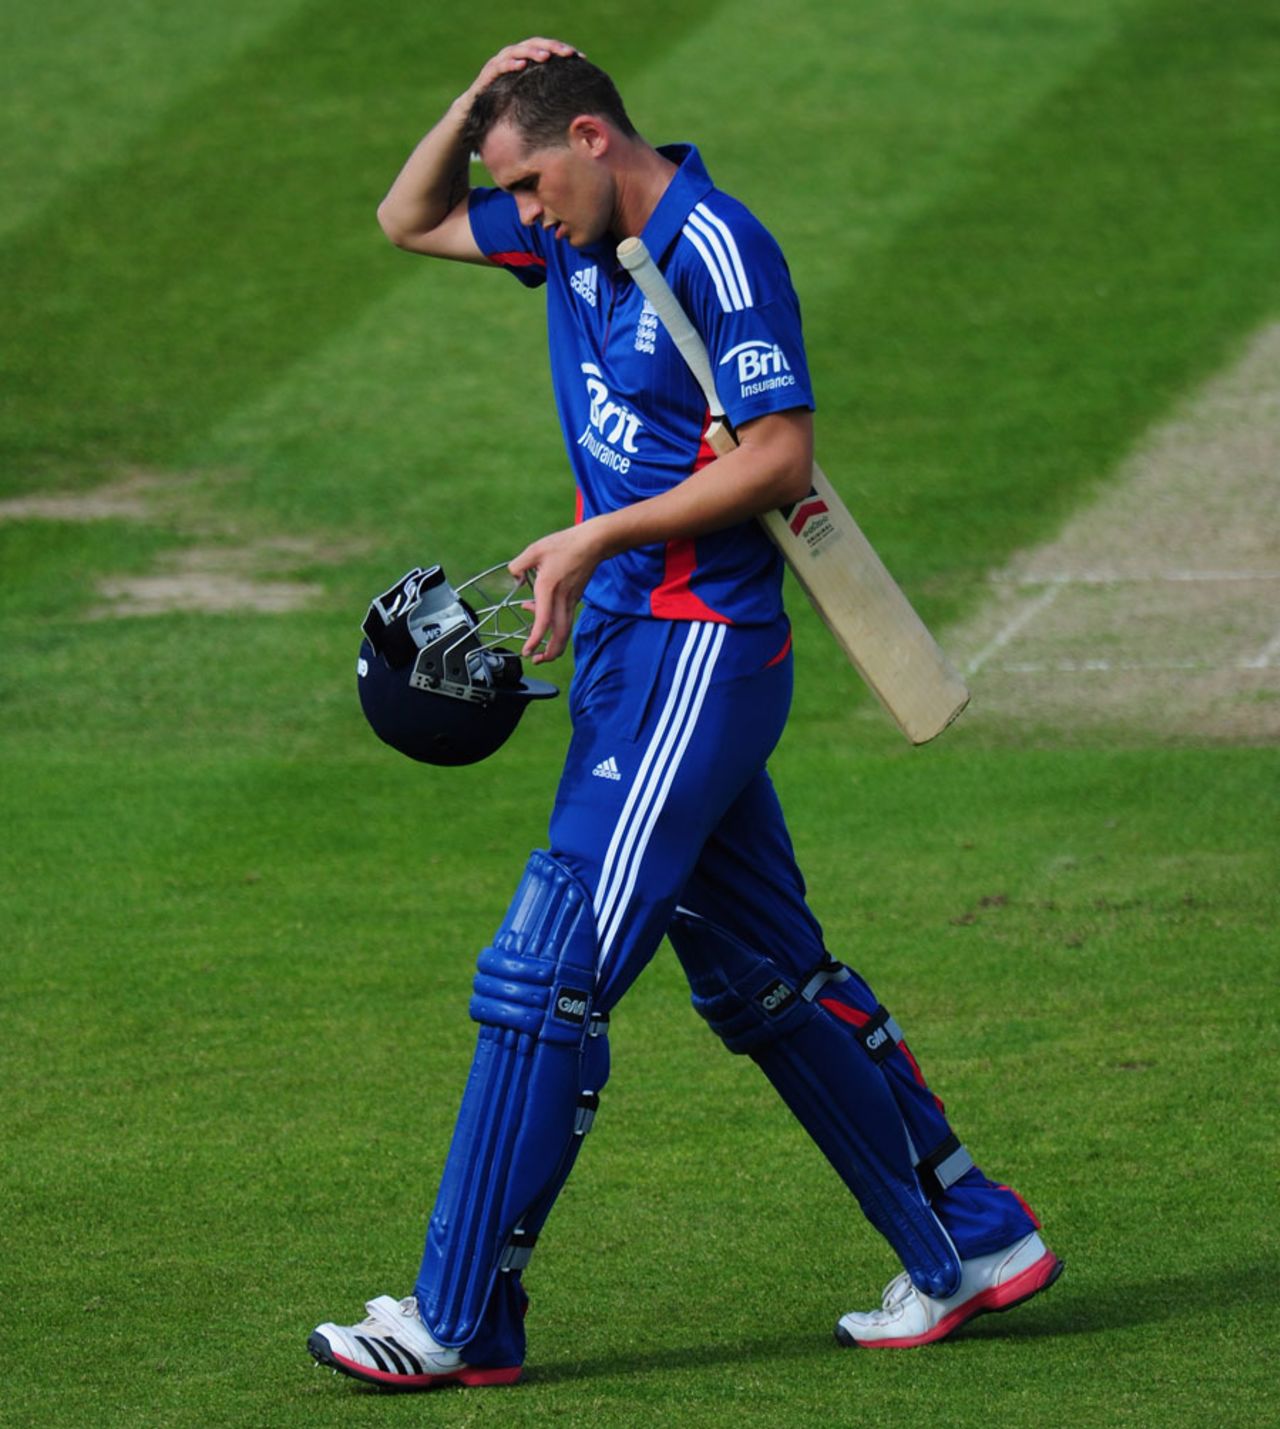 Alex Hales walks off after being run out, England v South Africa, 1st NatWest T20I, Chester-le-Street, September 8, 2012